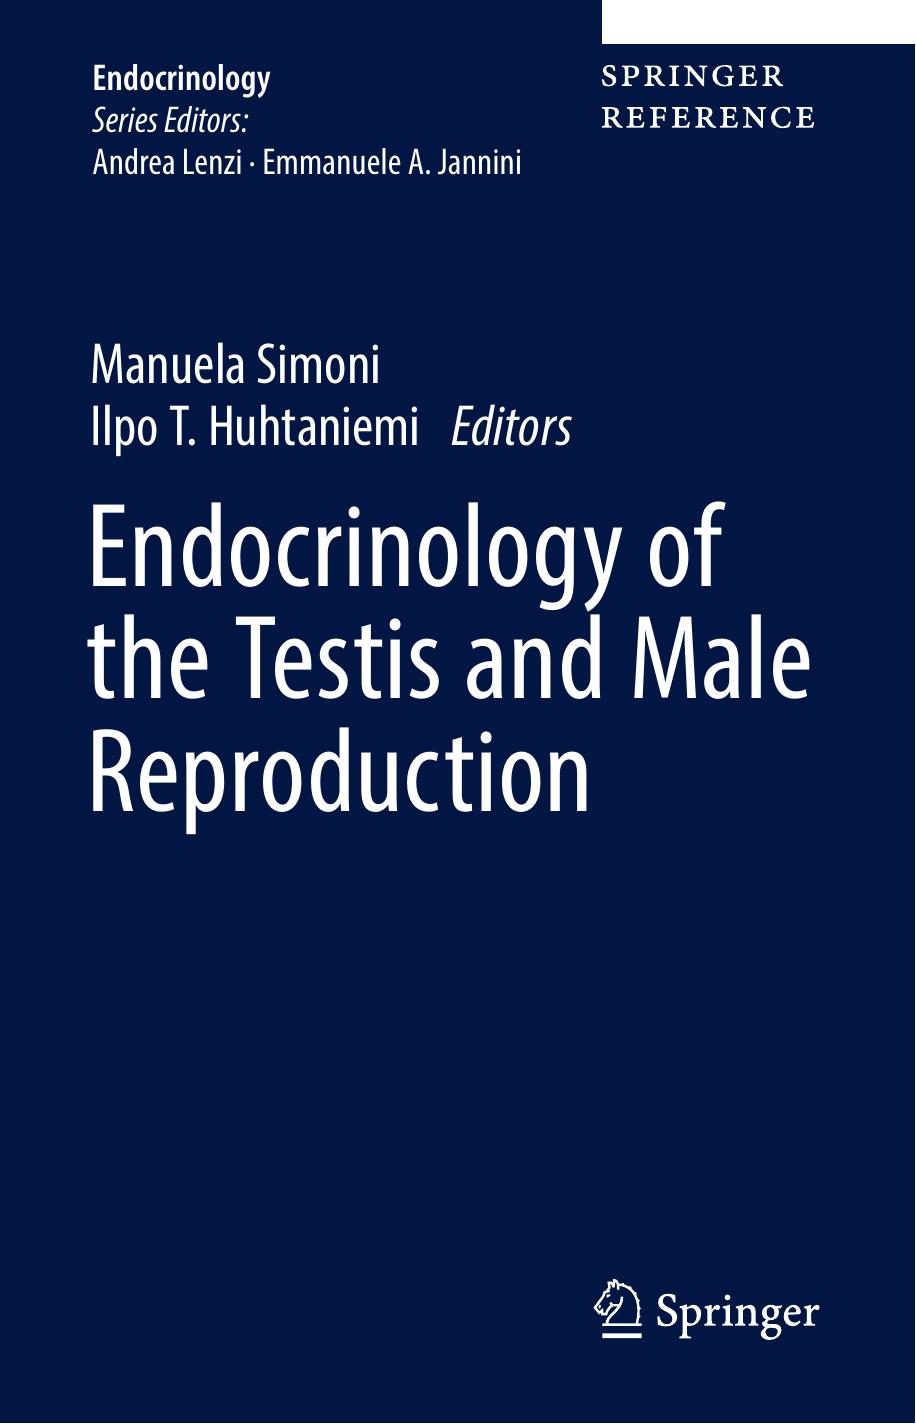 ENDOCRINOLOGY OF THE TESTIS 2017